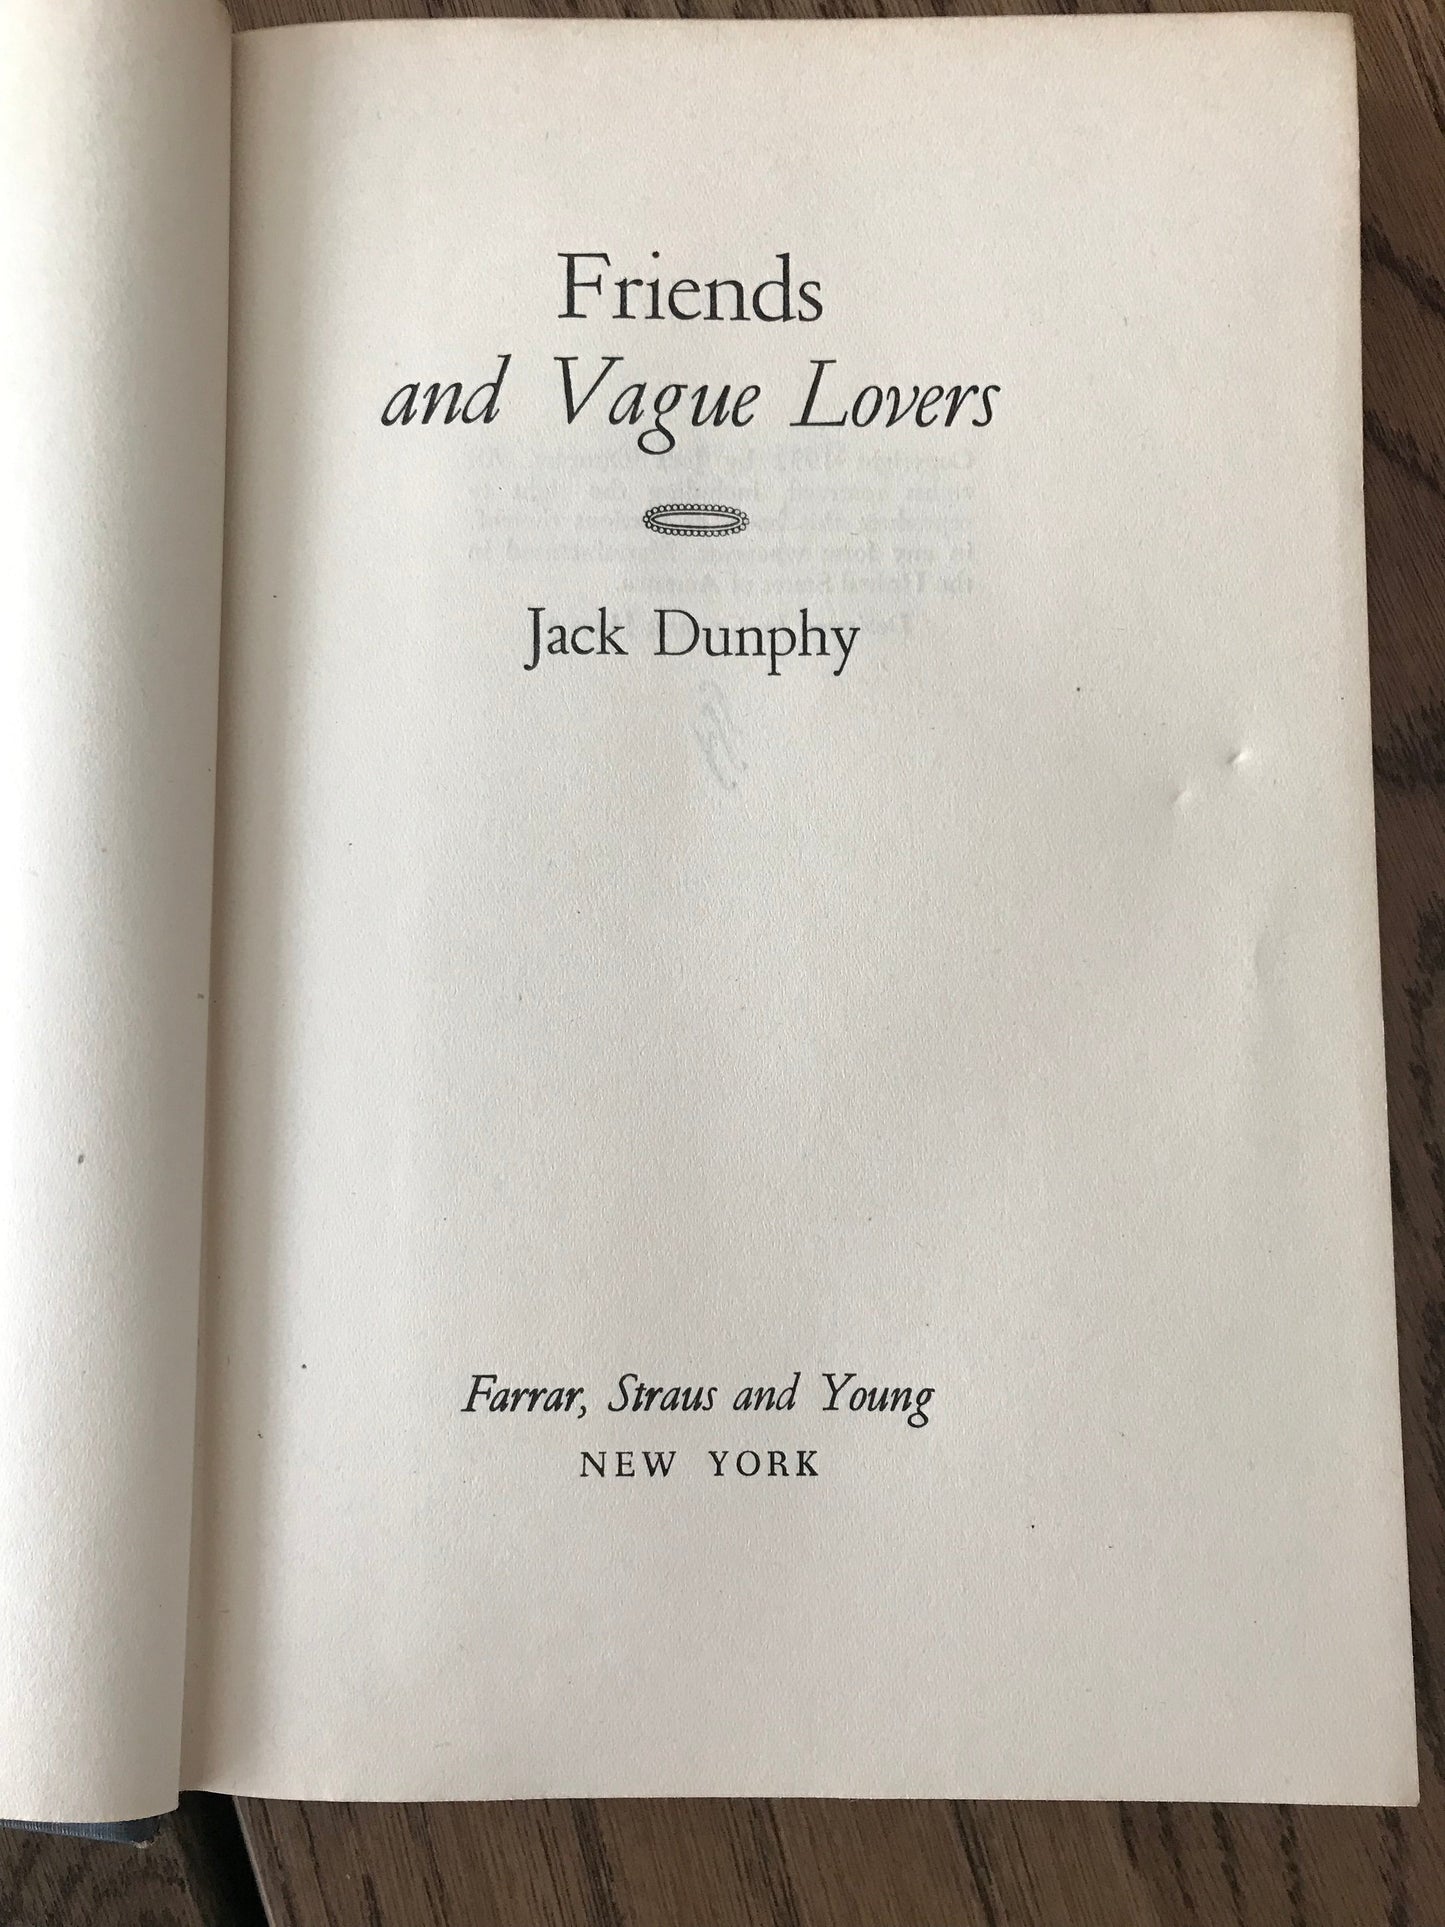 FRIENDS AND VAGUE LOVERS - BY JACK DUNPHY BooksCardsNBikes